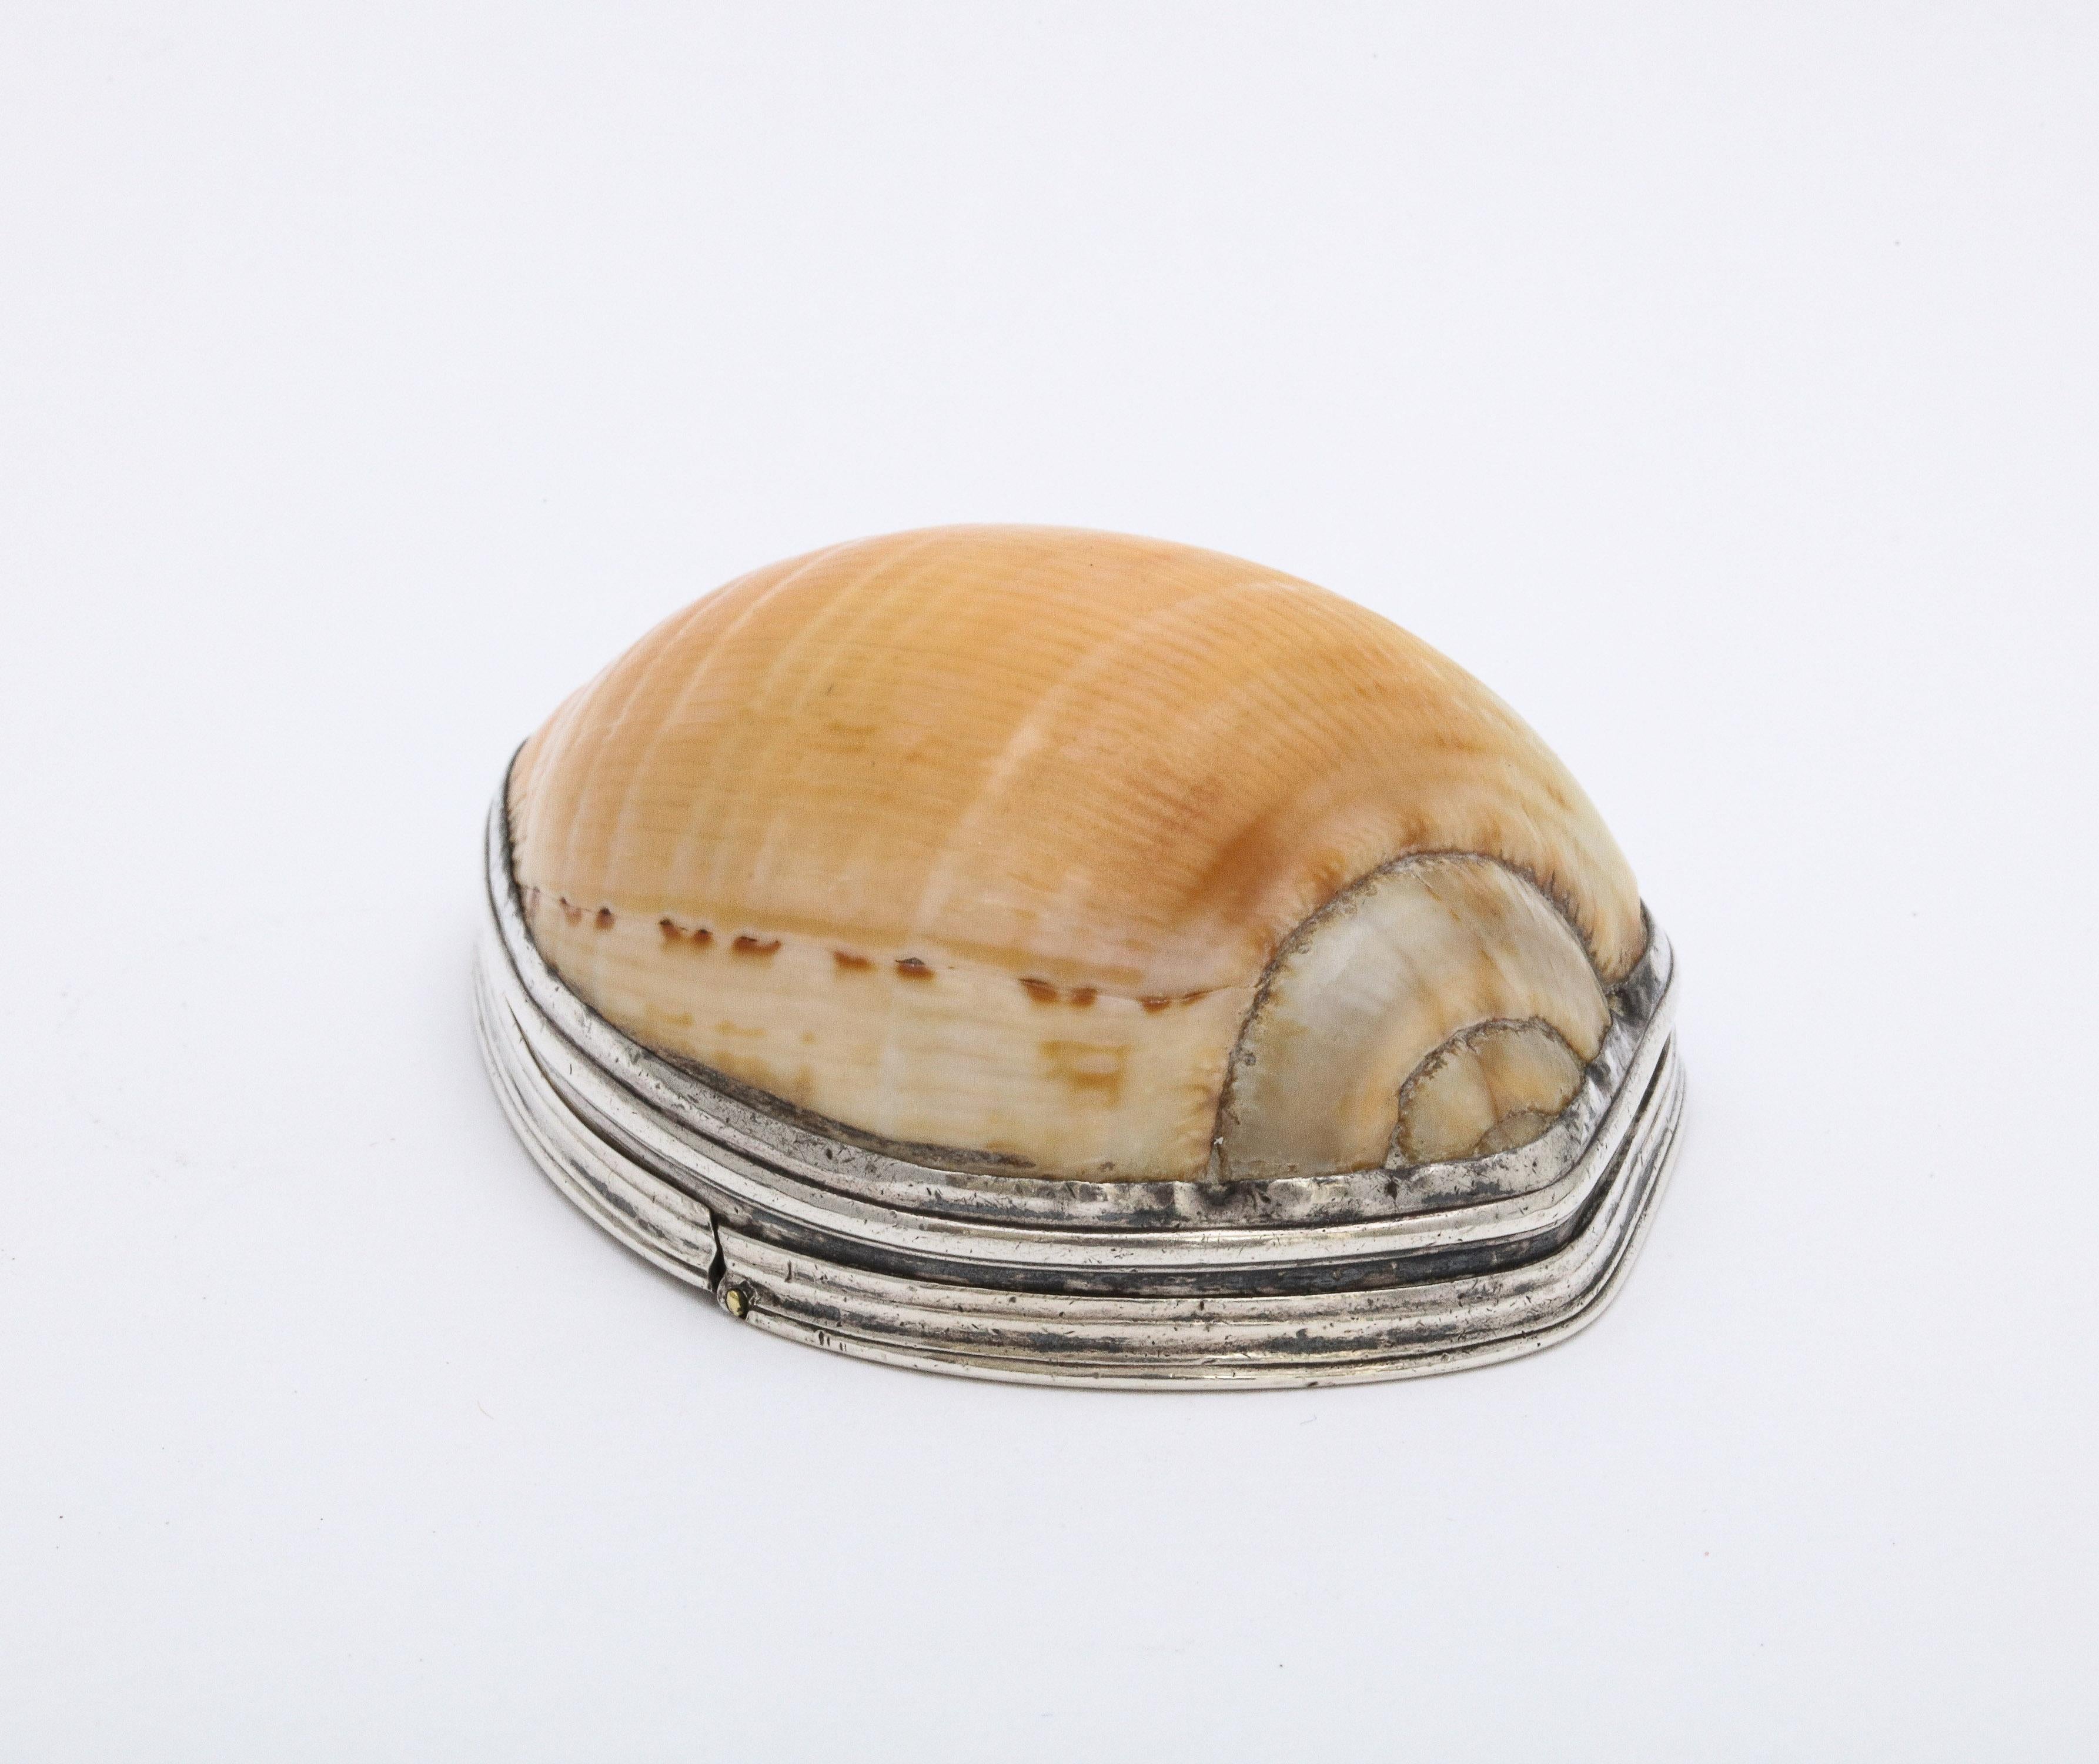 Late 18th Century George III Sterling Silver-Mounted Cowrie Shell Snuff Box with Hinged Lid